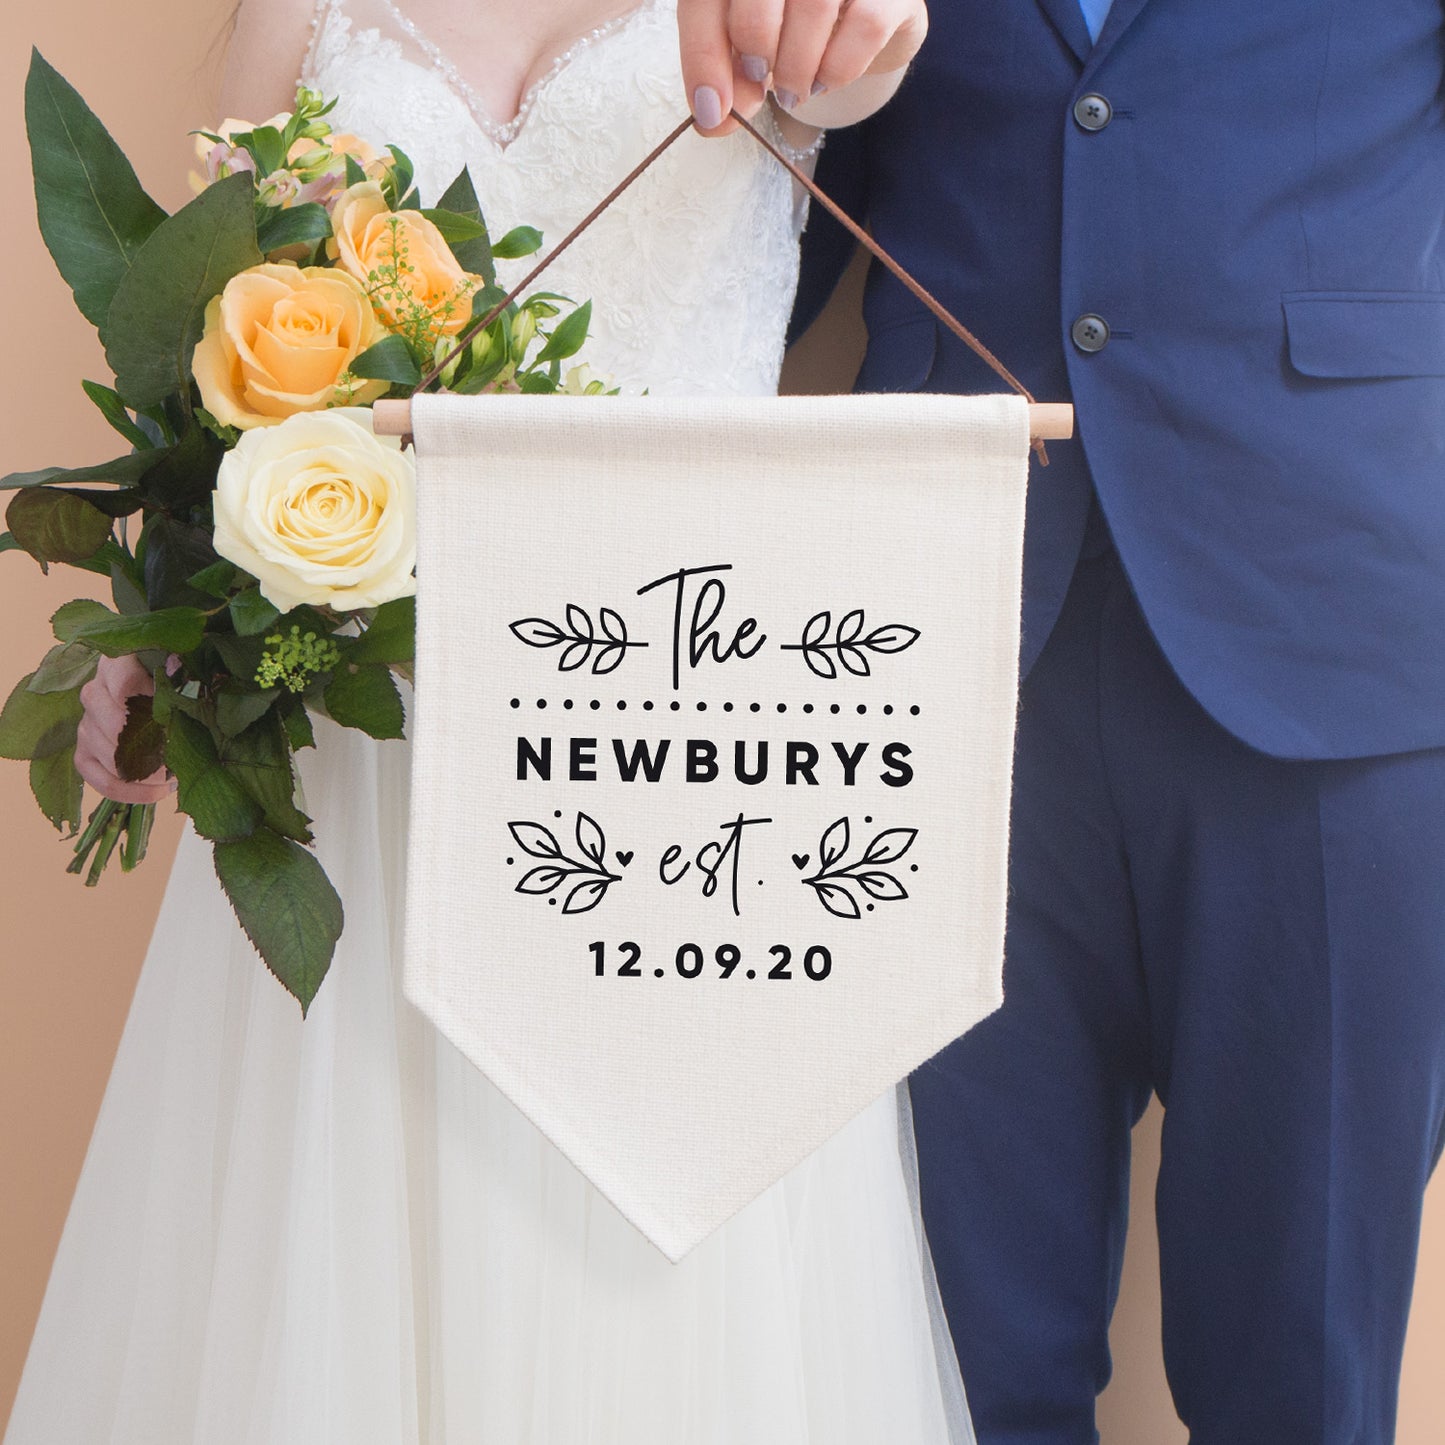 A personalised wedding pennant flag that reads' The [family name] est. [wedding date]. The text is surrounded by leafy vines and love hearts. A bride is holding the flag with a bouquet of peach flowers and is stood next to a groom in a blue suit.